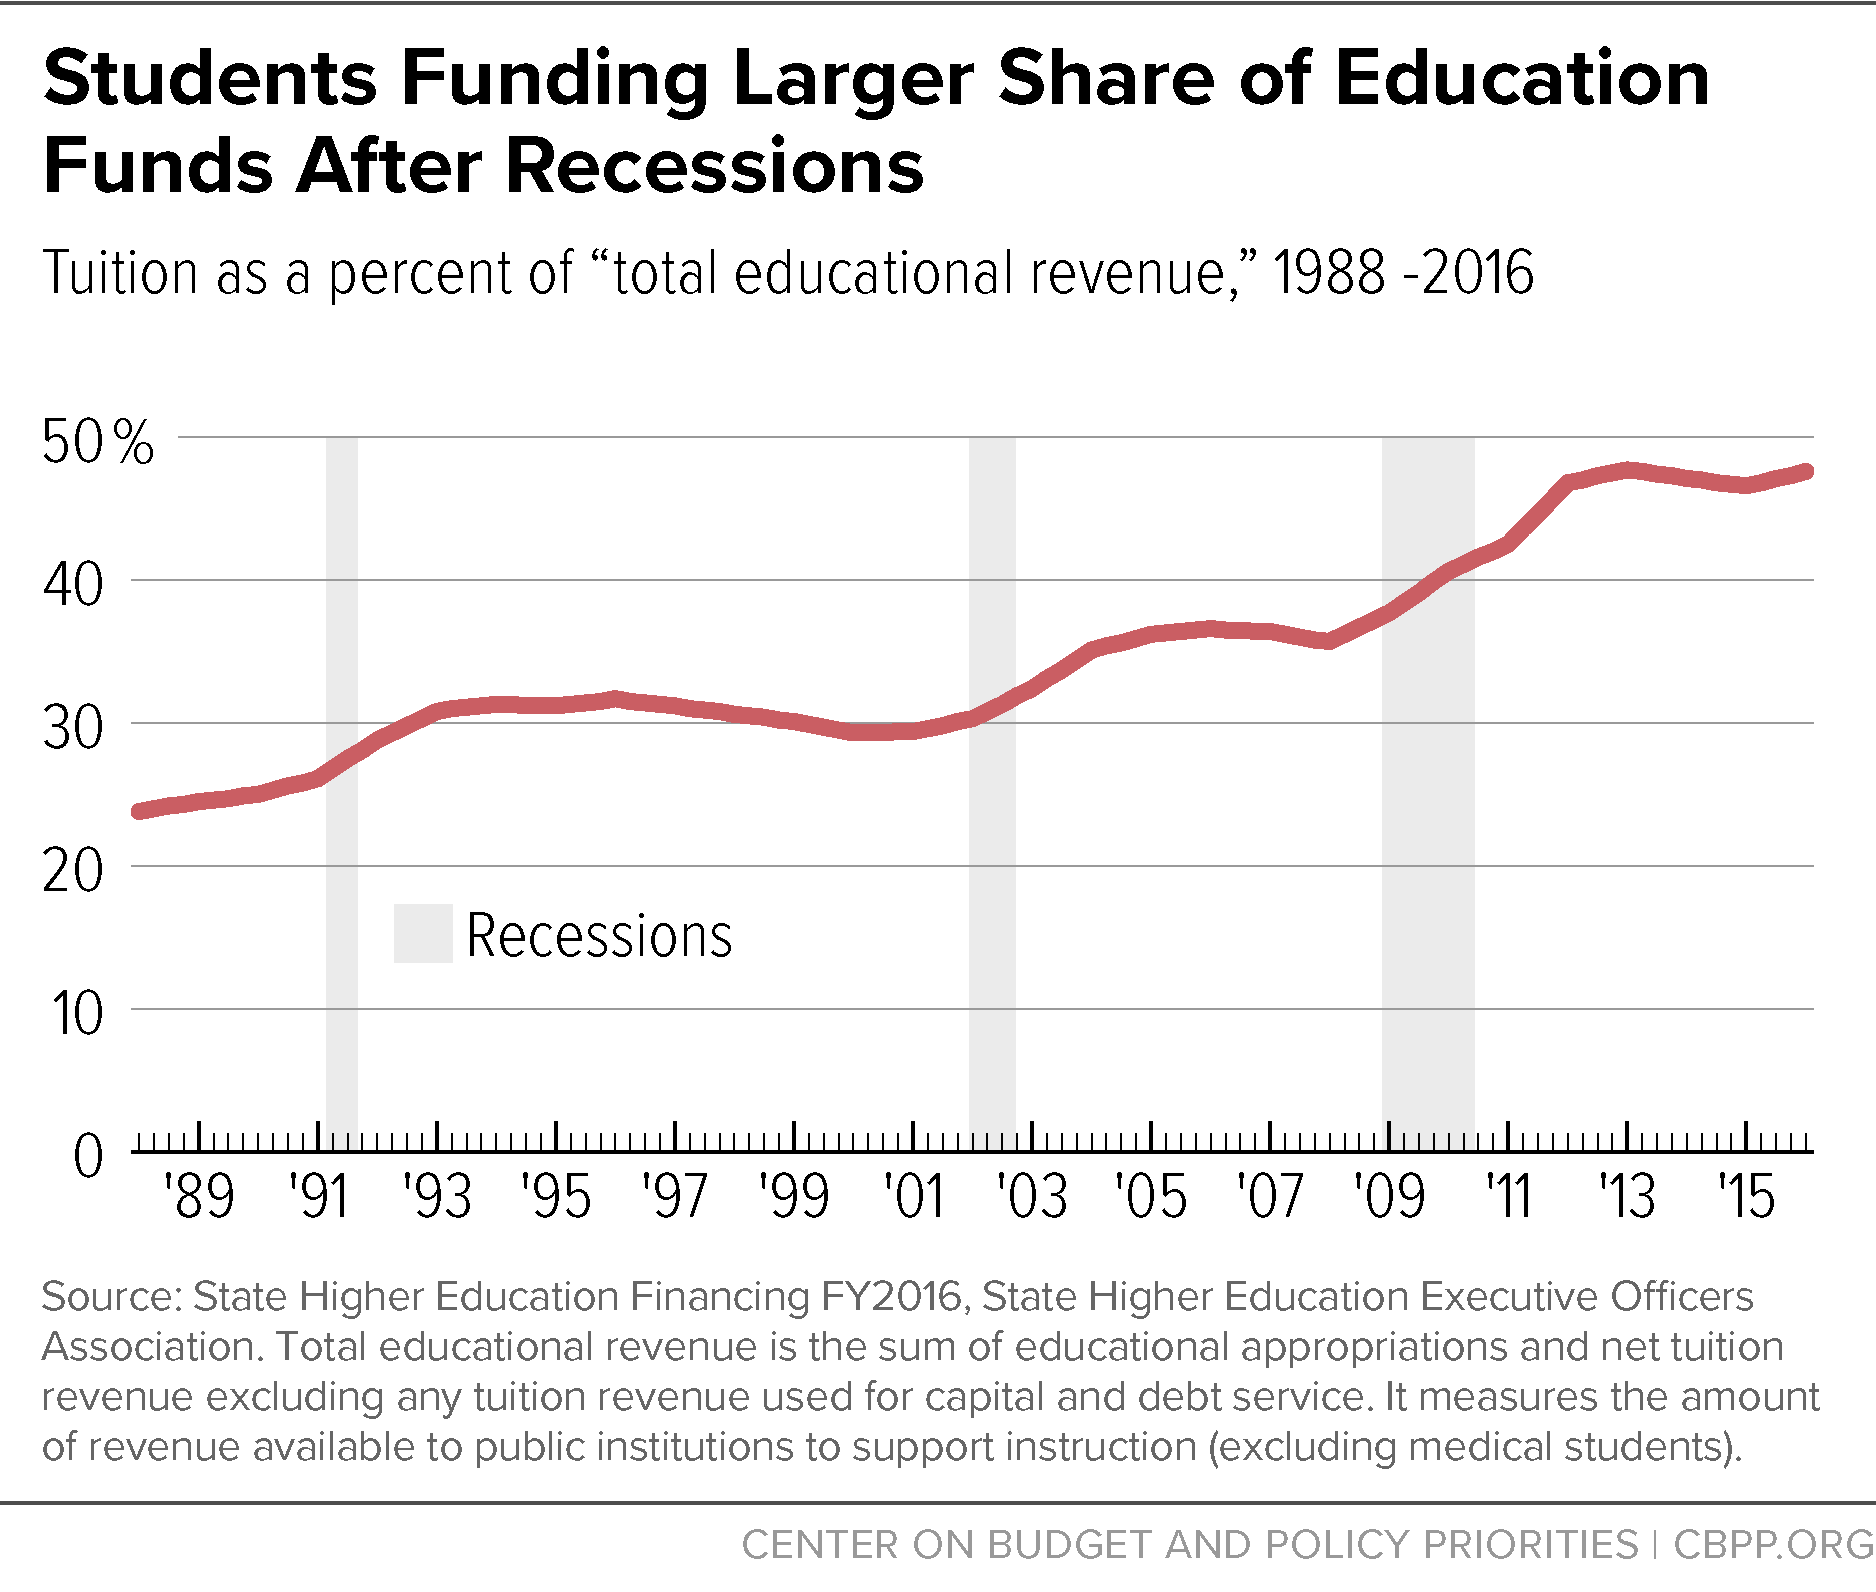 Students Funding Larger Share of Education Funds After Recessions